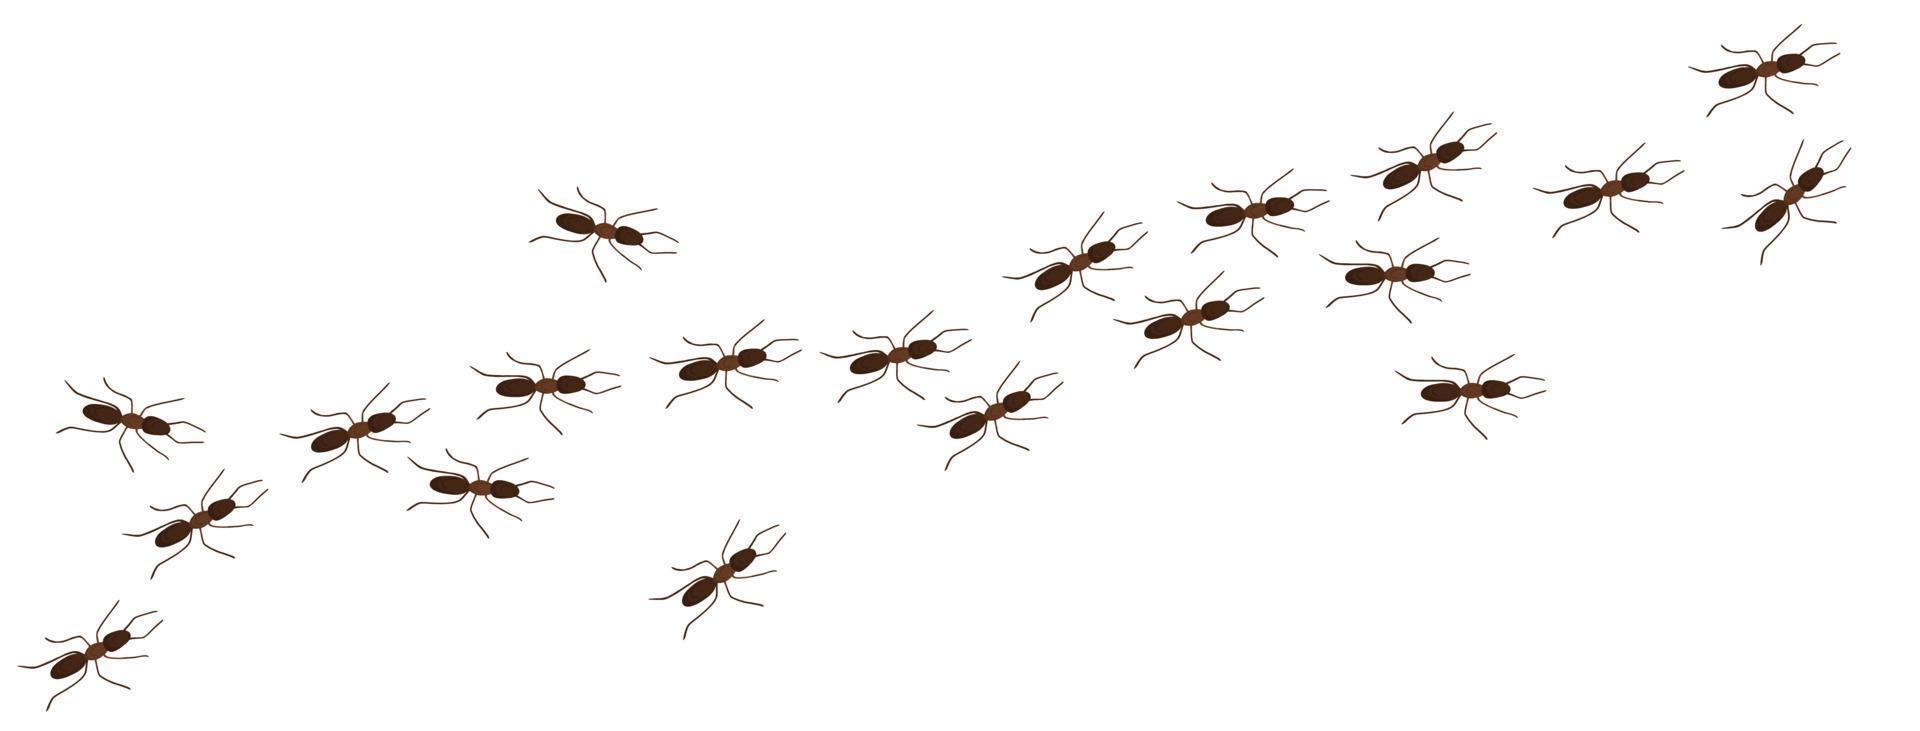 Ant trail in cartoon style vector